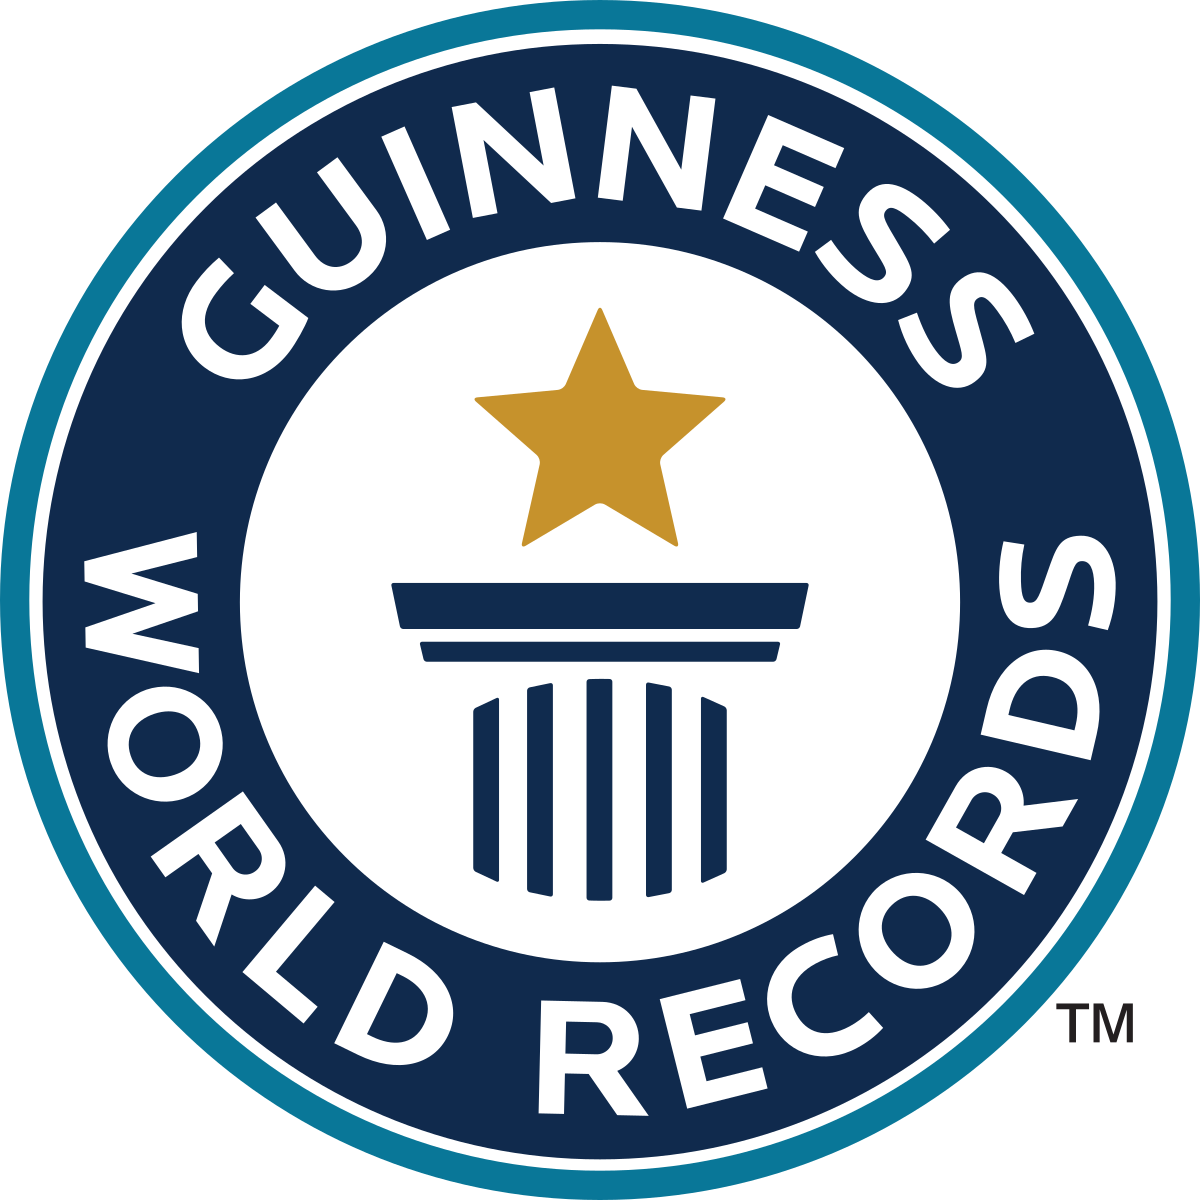 New Guinness World Record